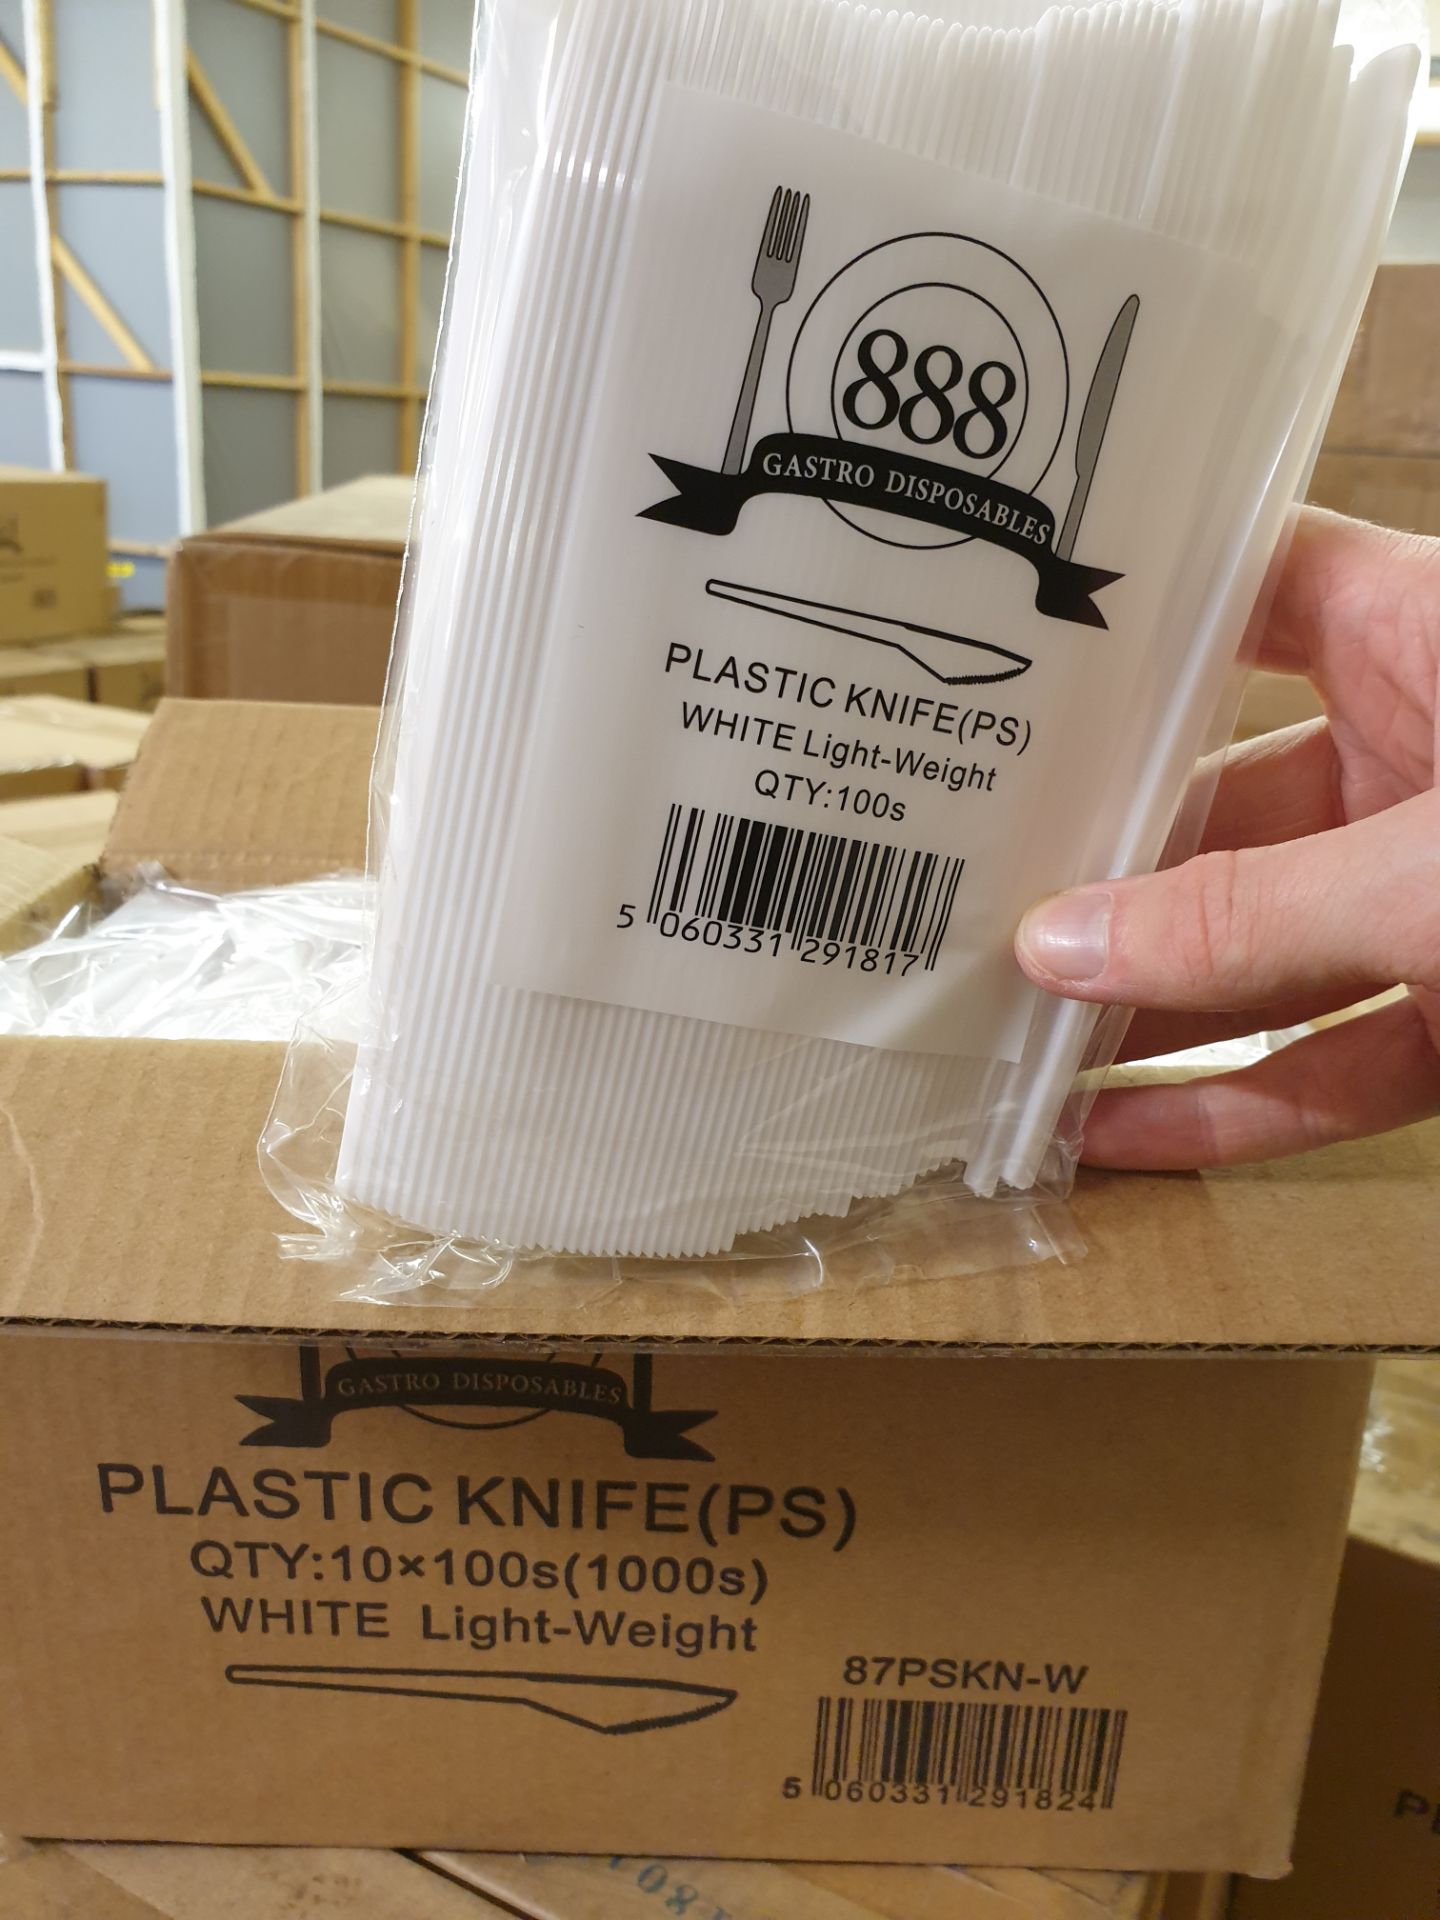 1 x Box of 1000 White Plastic Knives by 888 Gastro Disposables